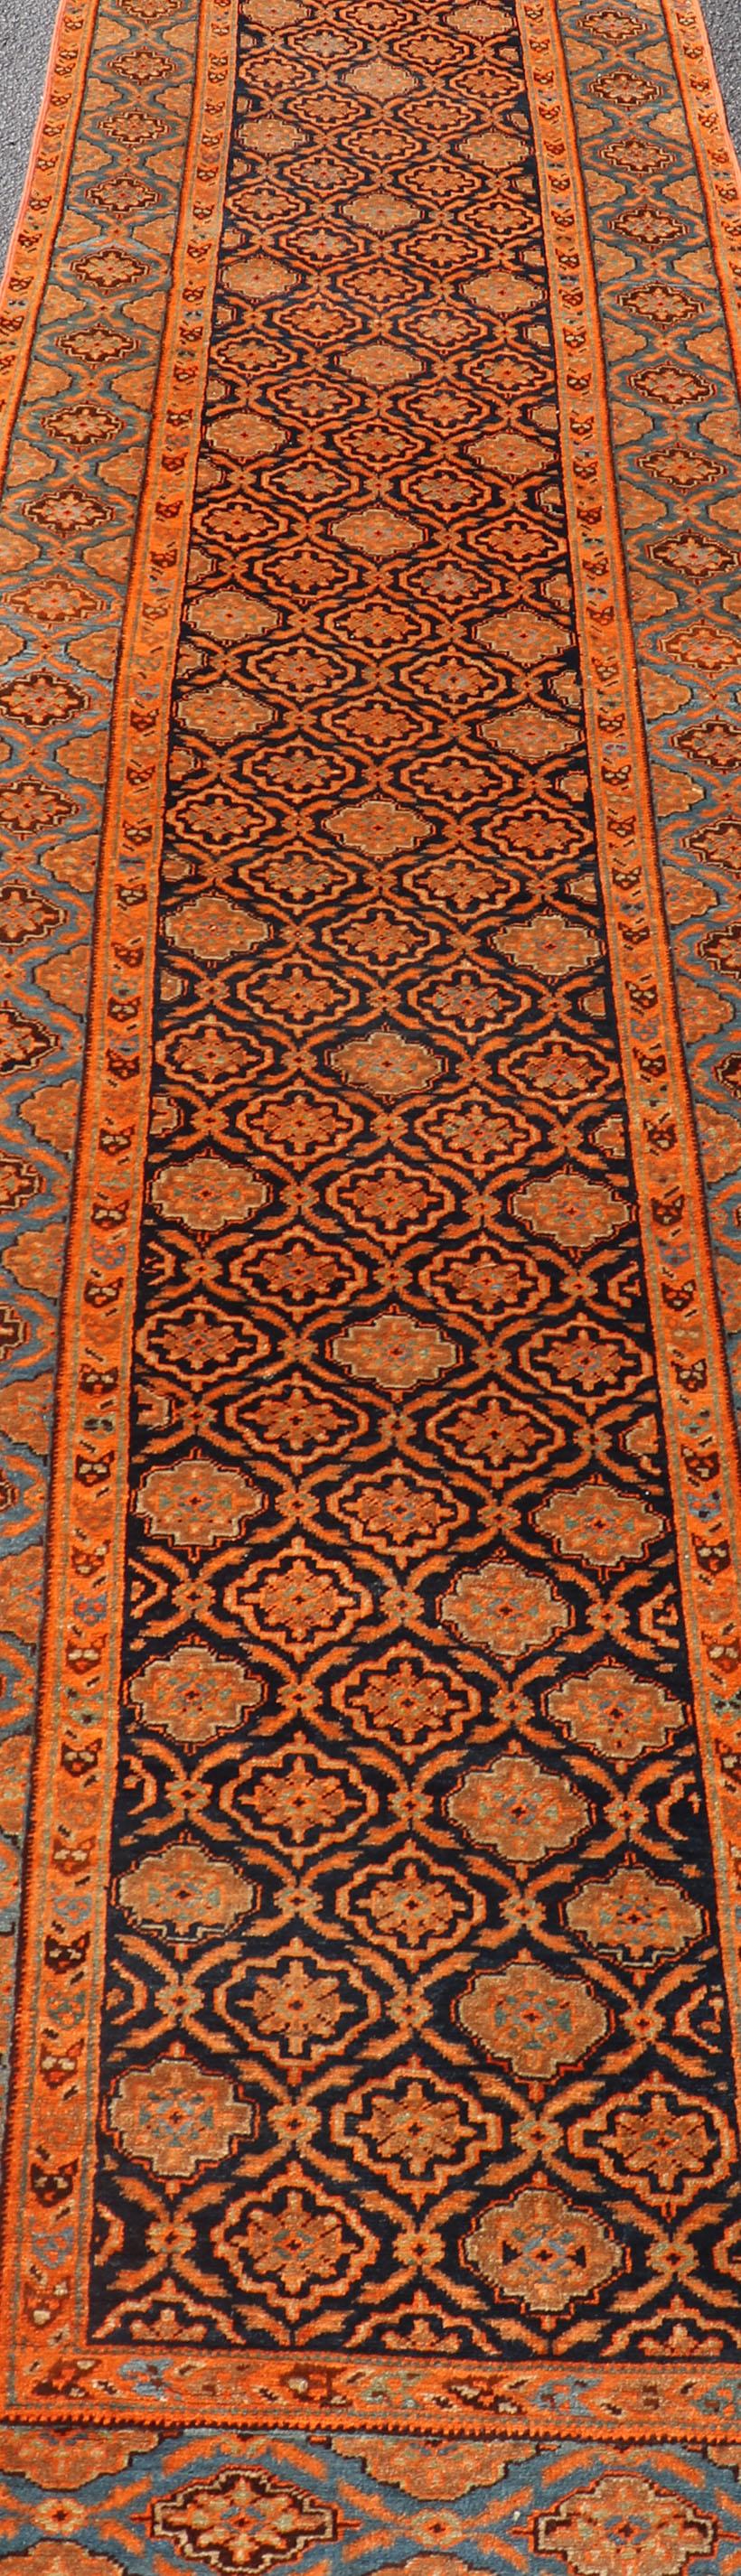 Antique Persian Khorasan Runner with All-Over Design in Blues, and Orange For Sale 1